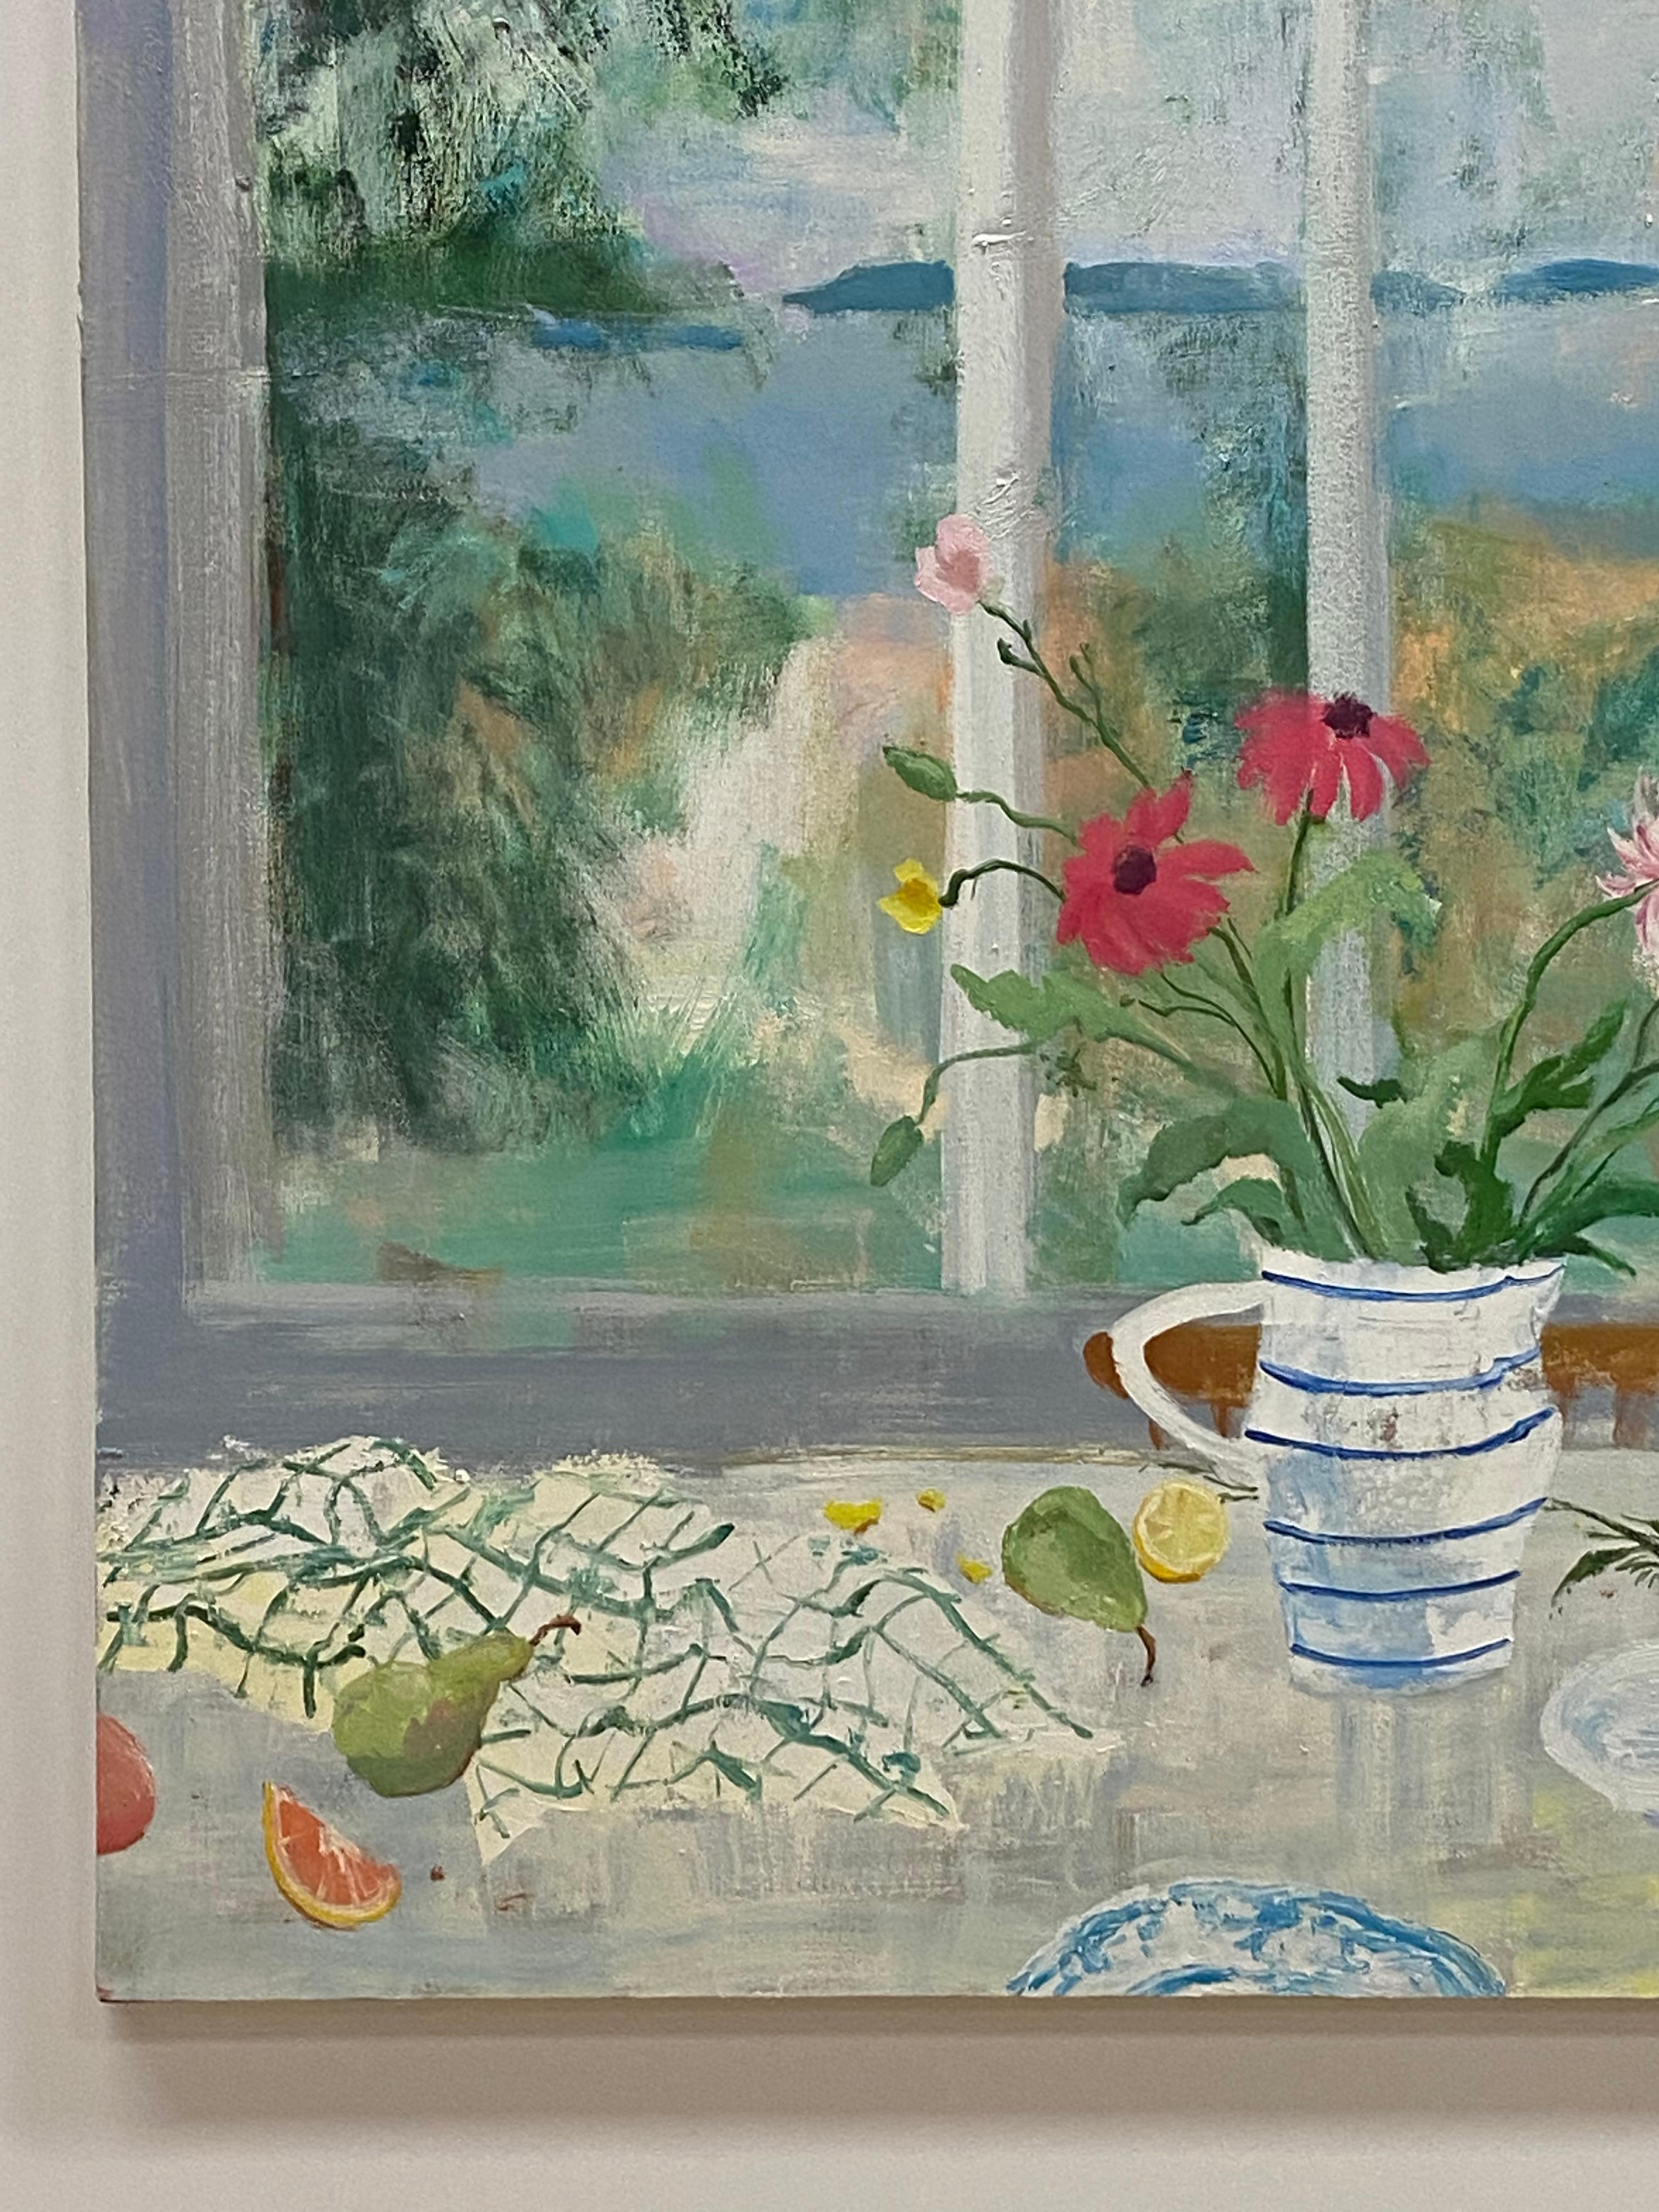 Island Pears, Lake Landscape, Flowers, Fruits Botanical Dining Room Still Life - Contemporary Painting by Melanie Parke